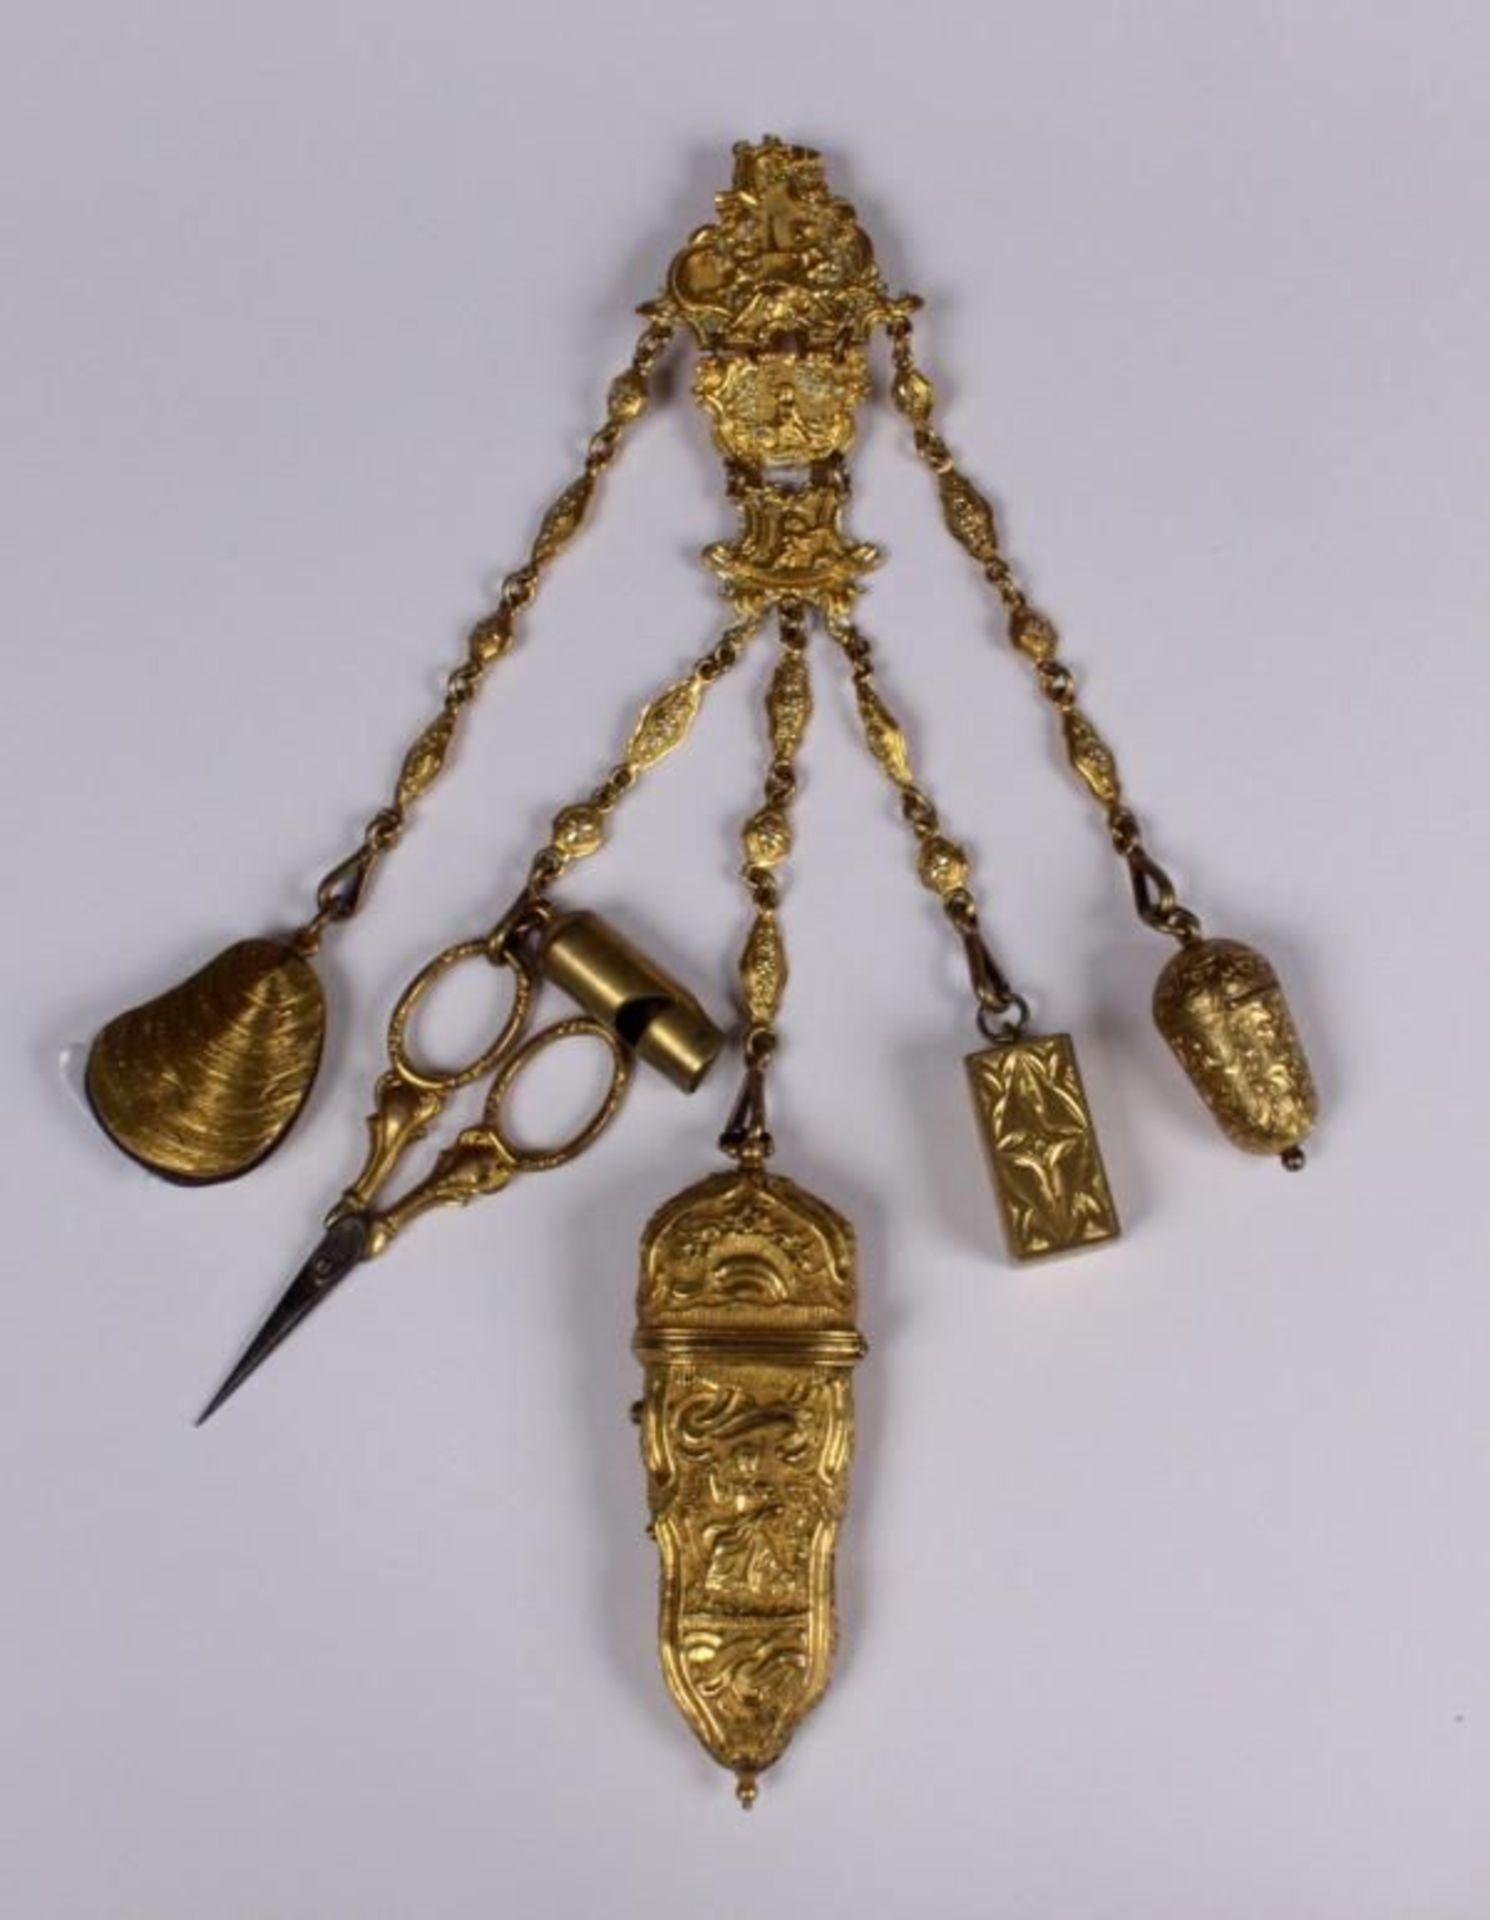 A CHARIVARI CHAIN 19th century with 6 pendants, gilt metal in Rococo style.    Starting price: 900